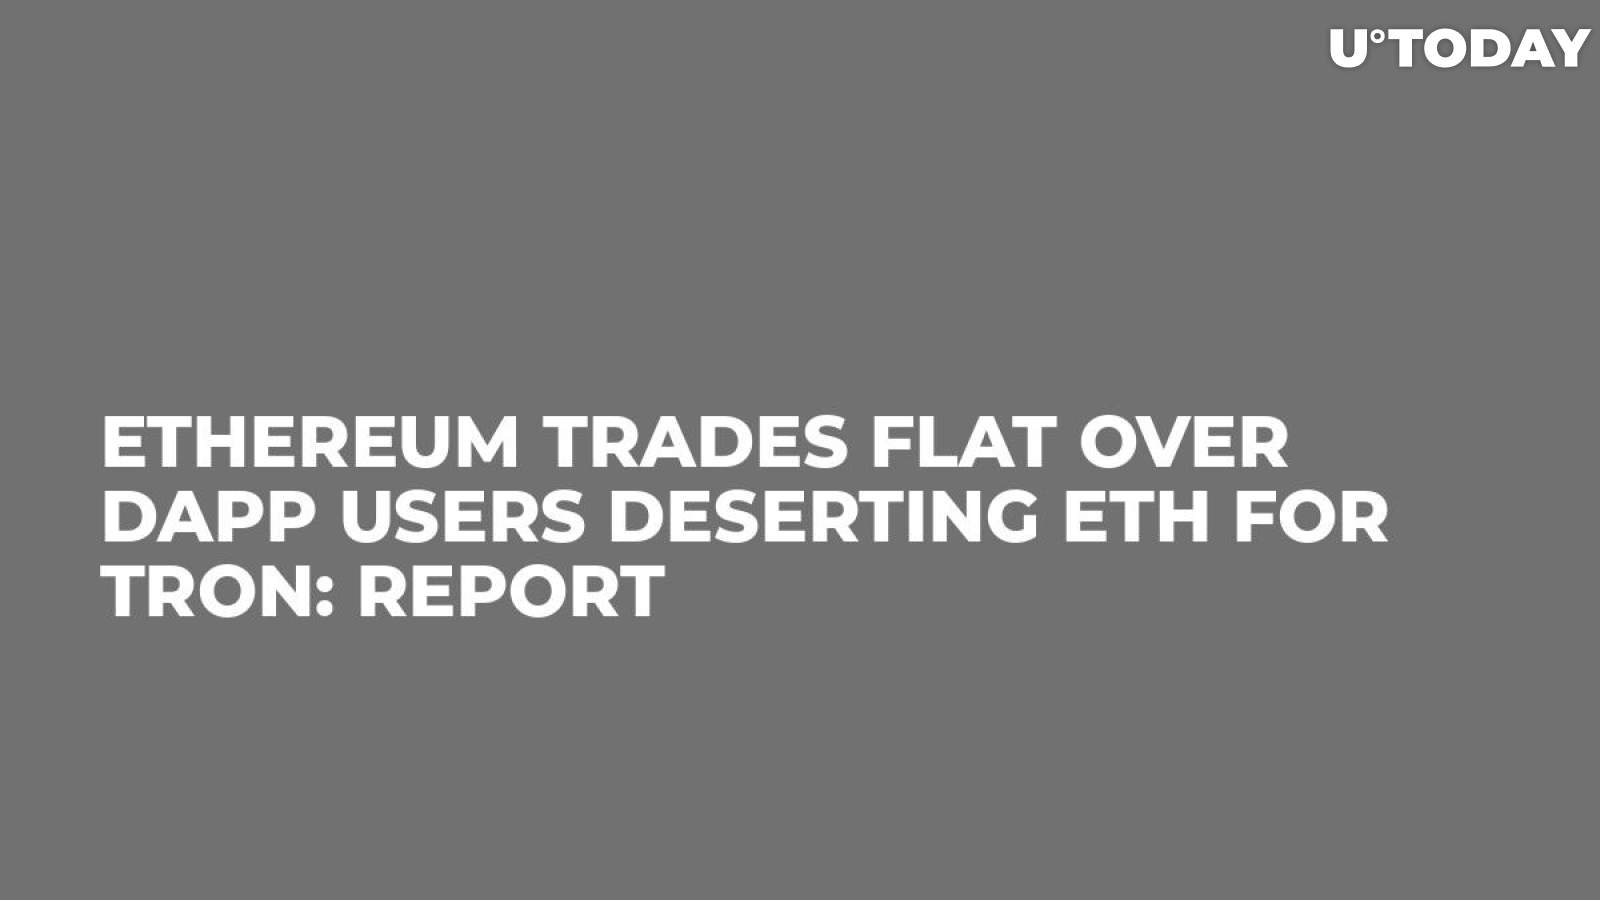 Ethereum Trades Flat over DApp Users Deserting ETH for Tron: Report